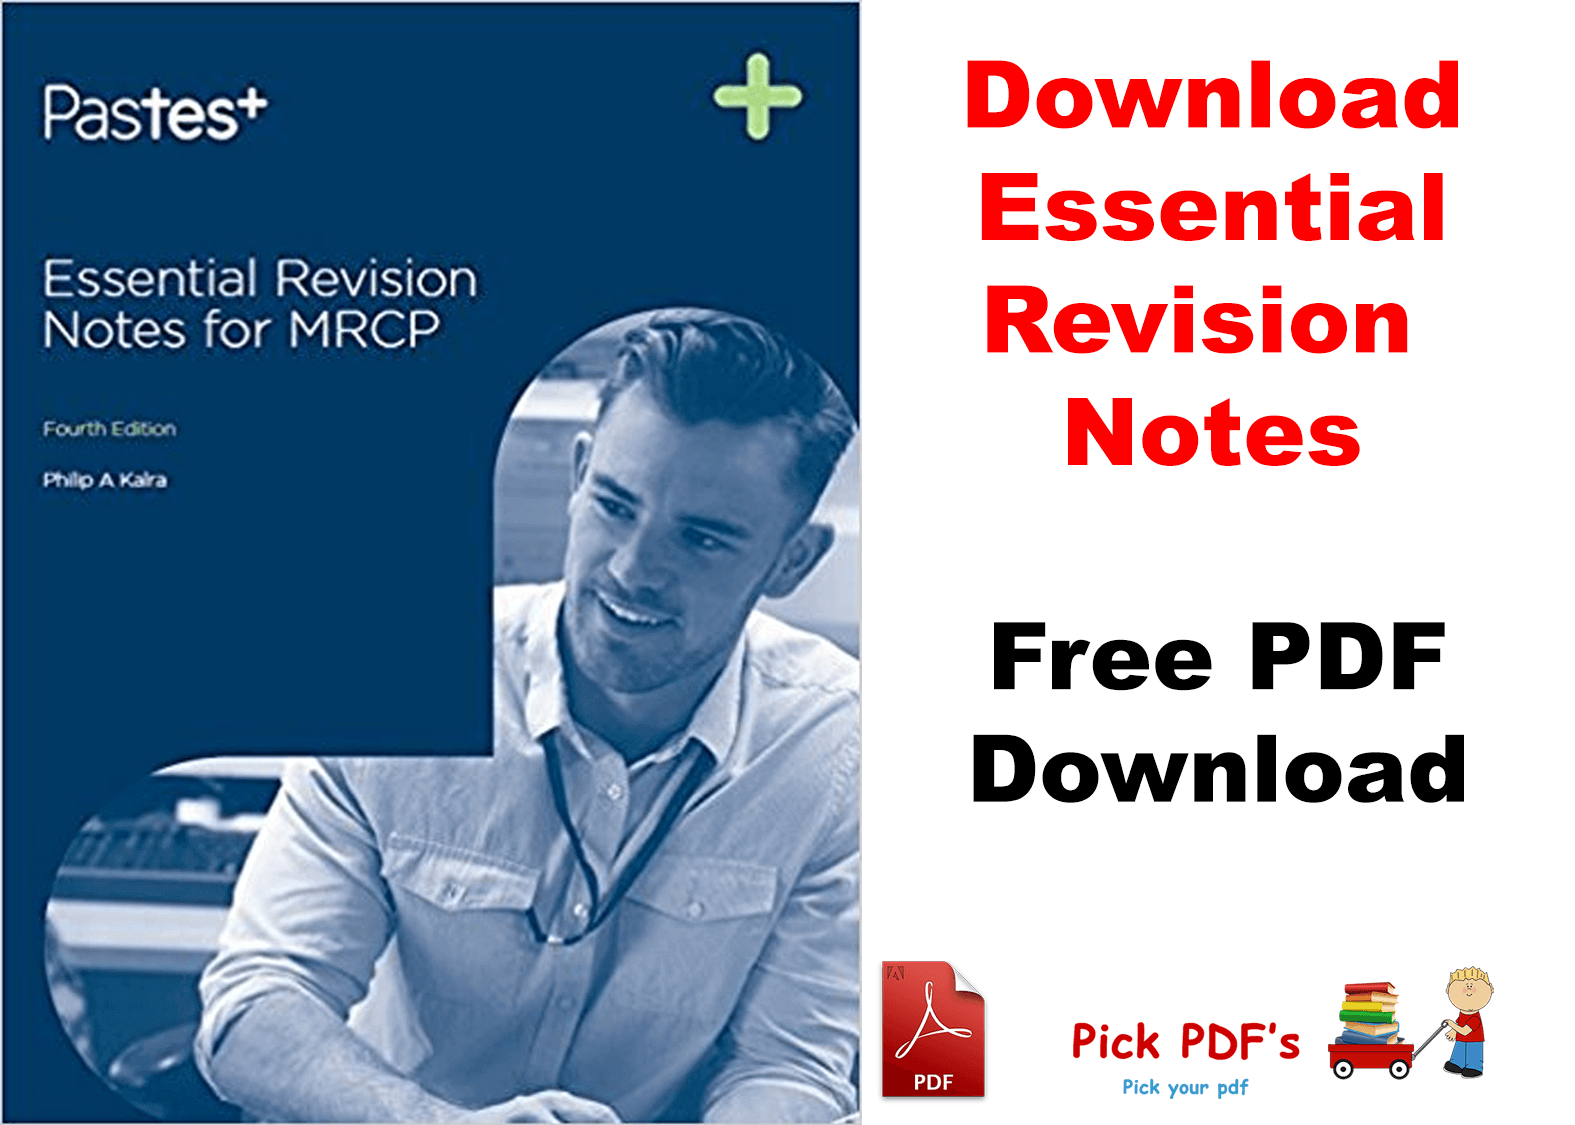 https://pickpdfs.com/pastest-essential-revision-notes-for-mrcp-pdf-4th-edition-free-direct-links/